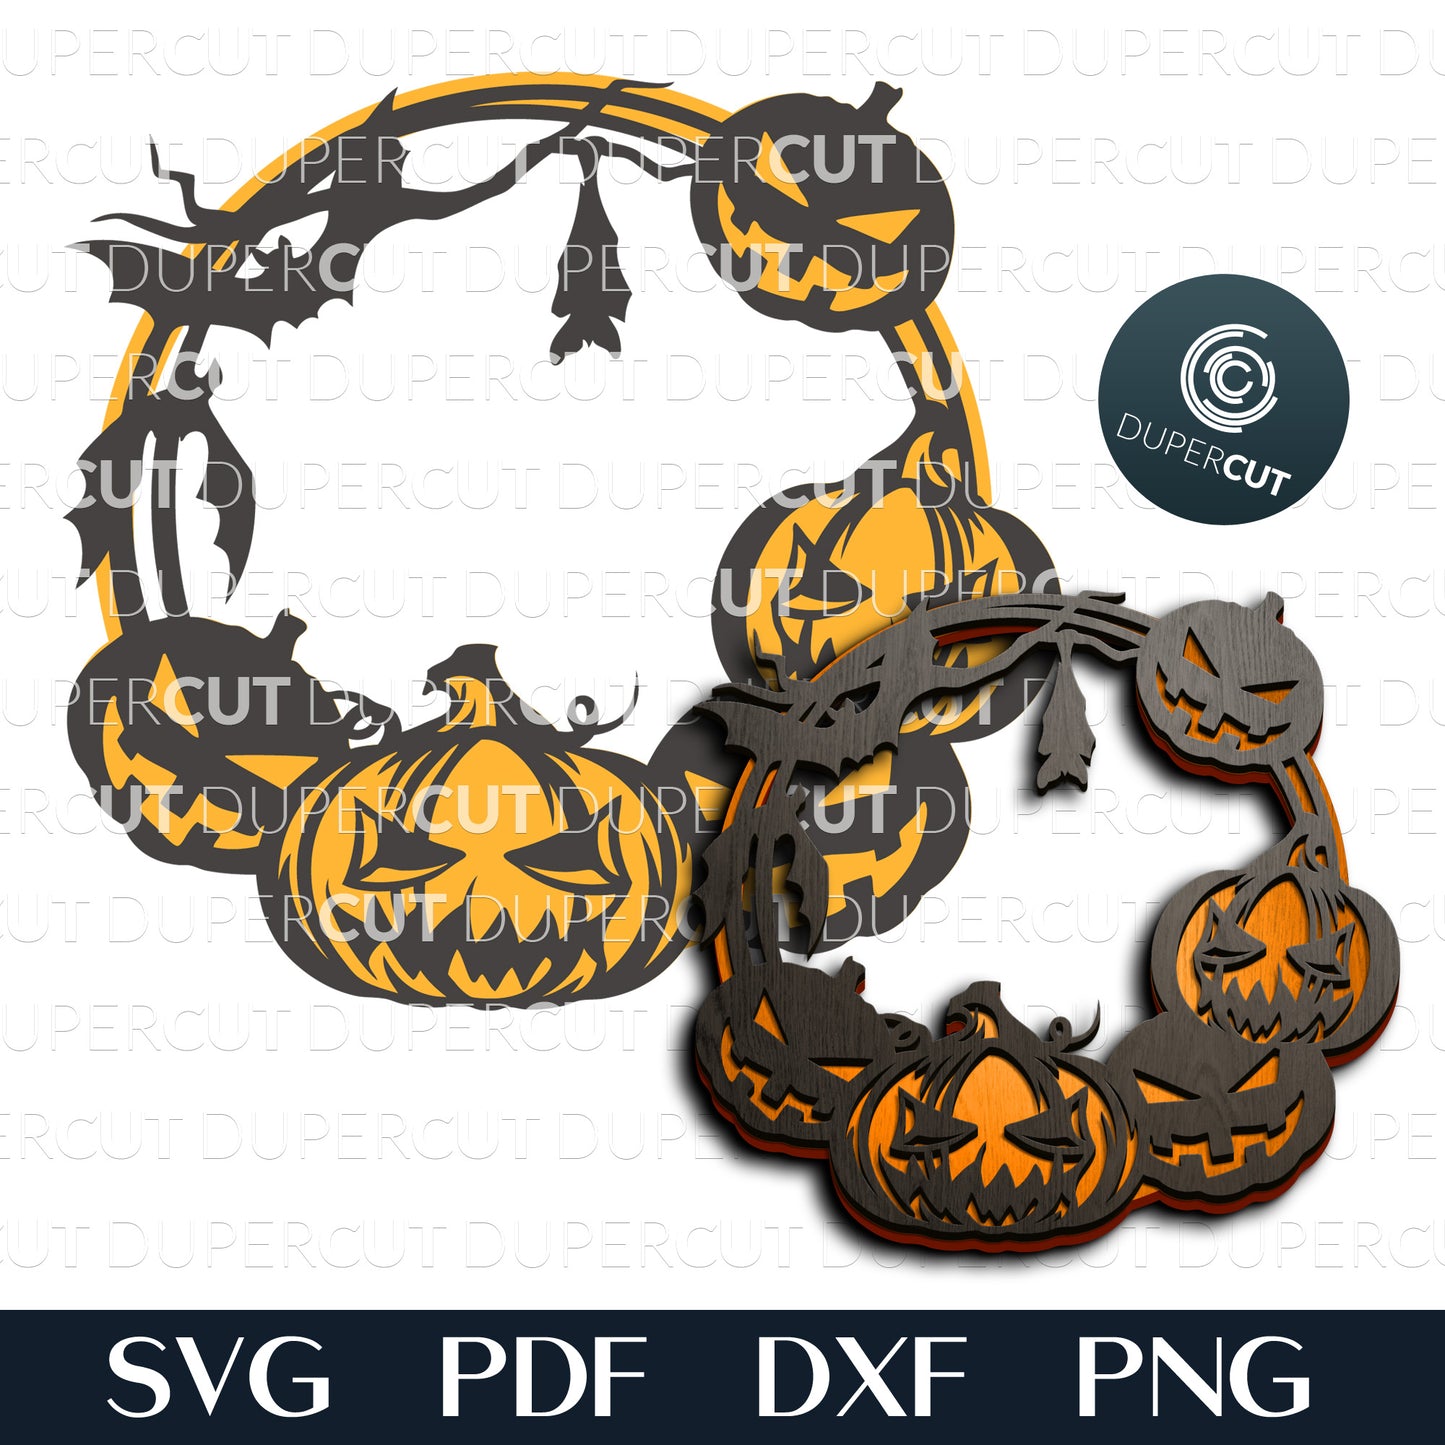 Halloween wreath door hanger sign - Layered SVG PDF DXF vector files for Glowforge, Cricut, Silhouette, laser cutting machines